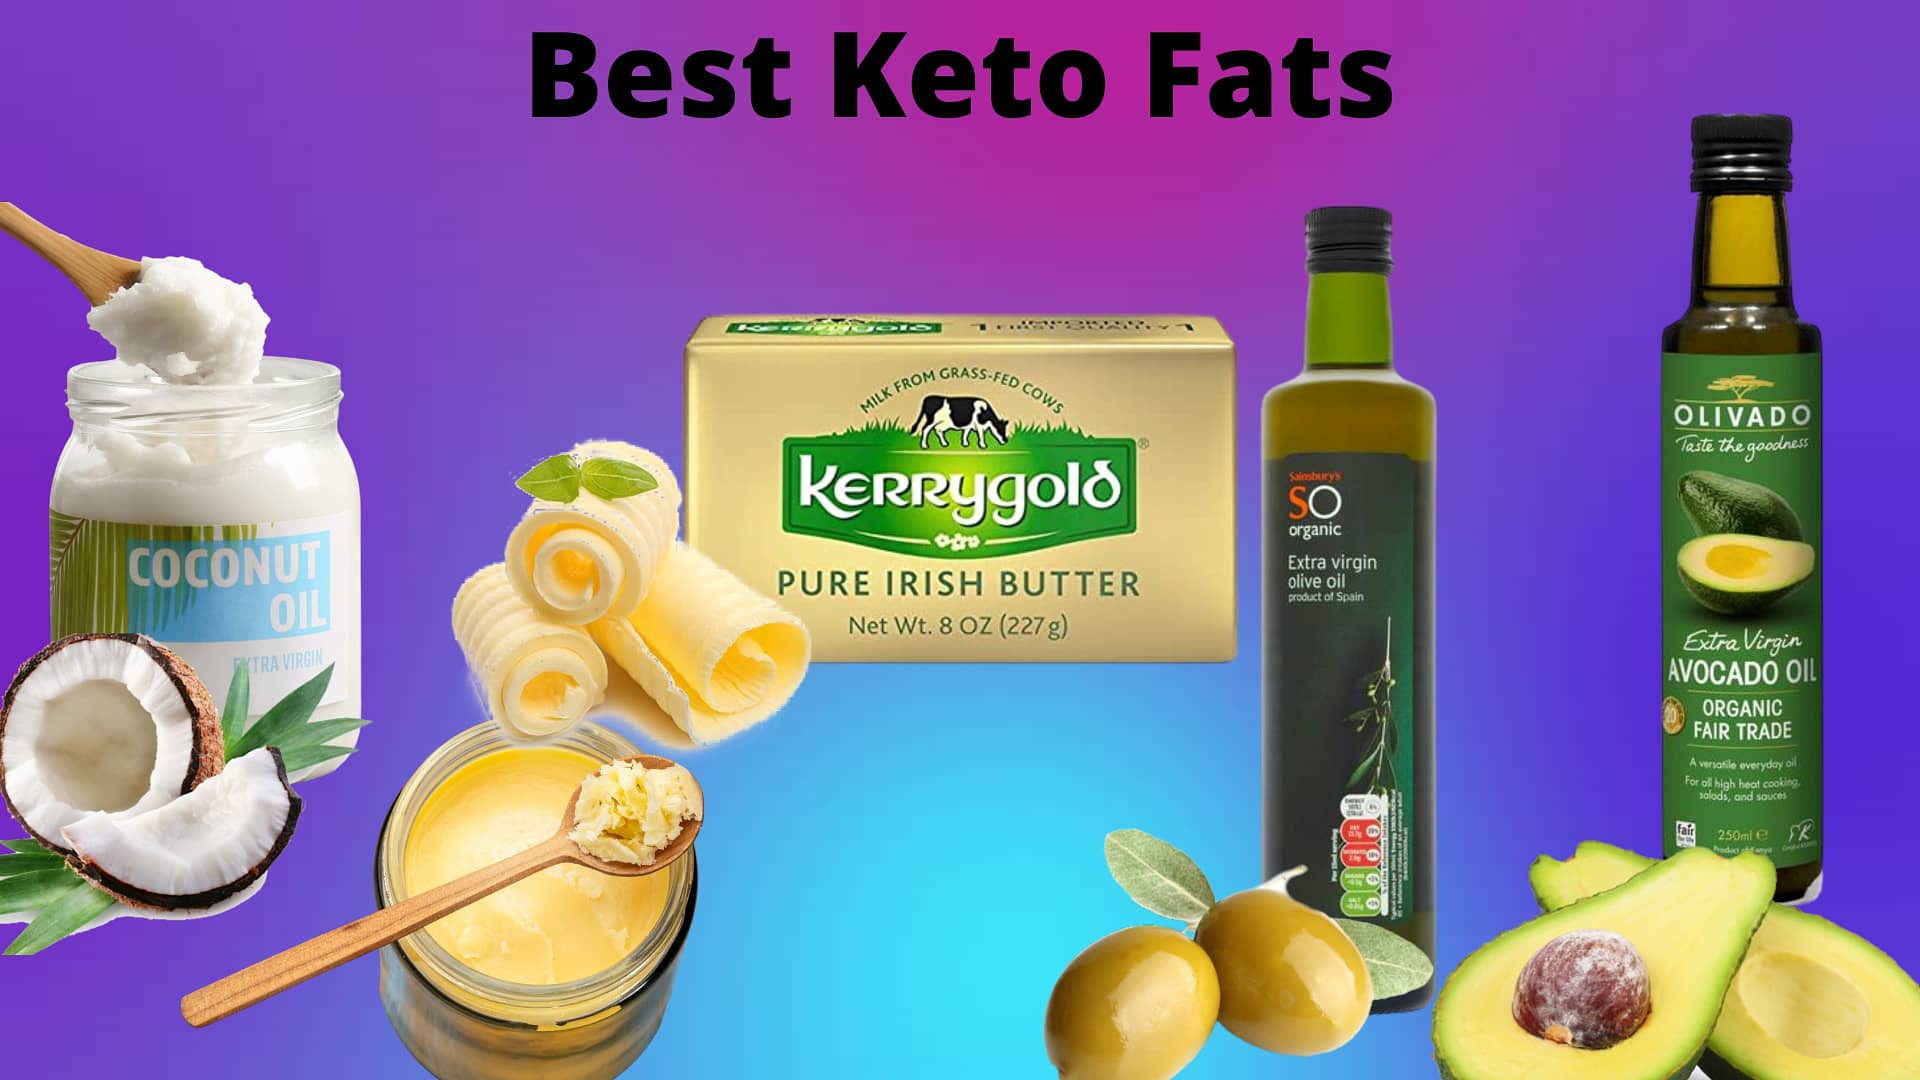 The Best Keto Fats.